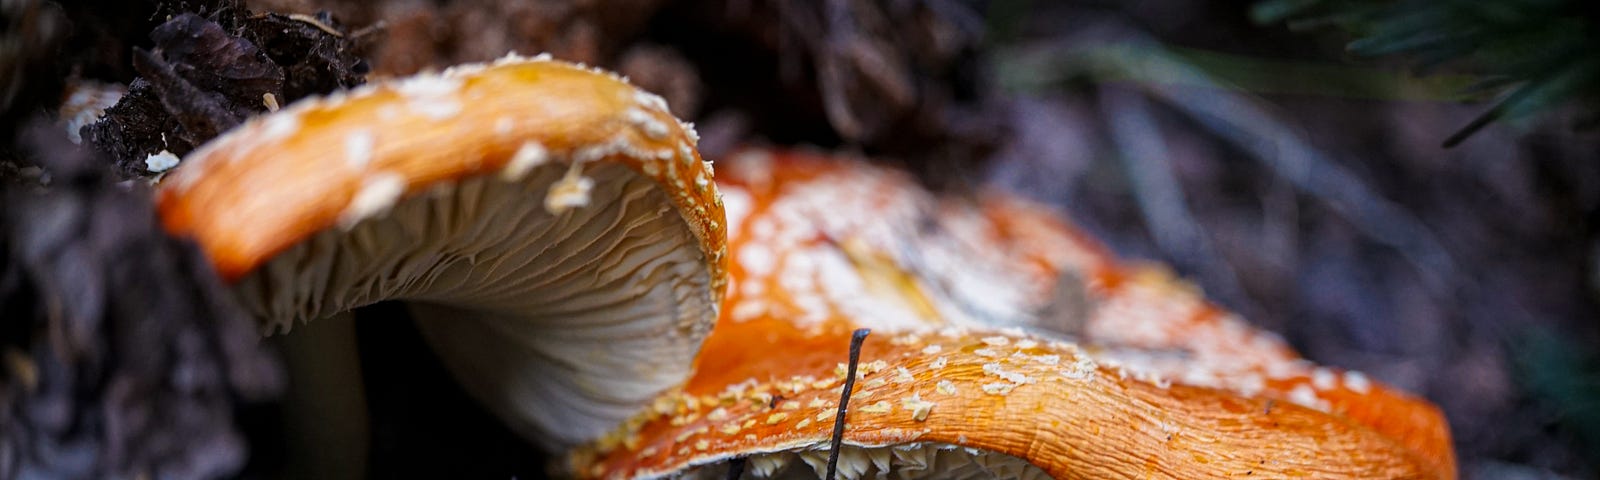 Amanita Muscaria, Growing at the base of a tree in a forest of pine, fir and aspen.